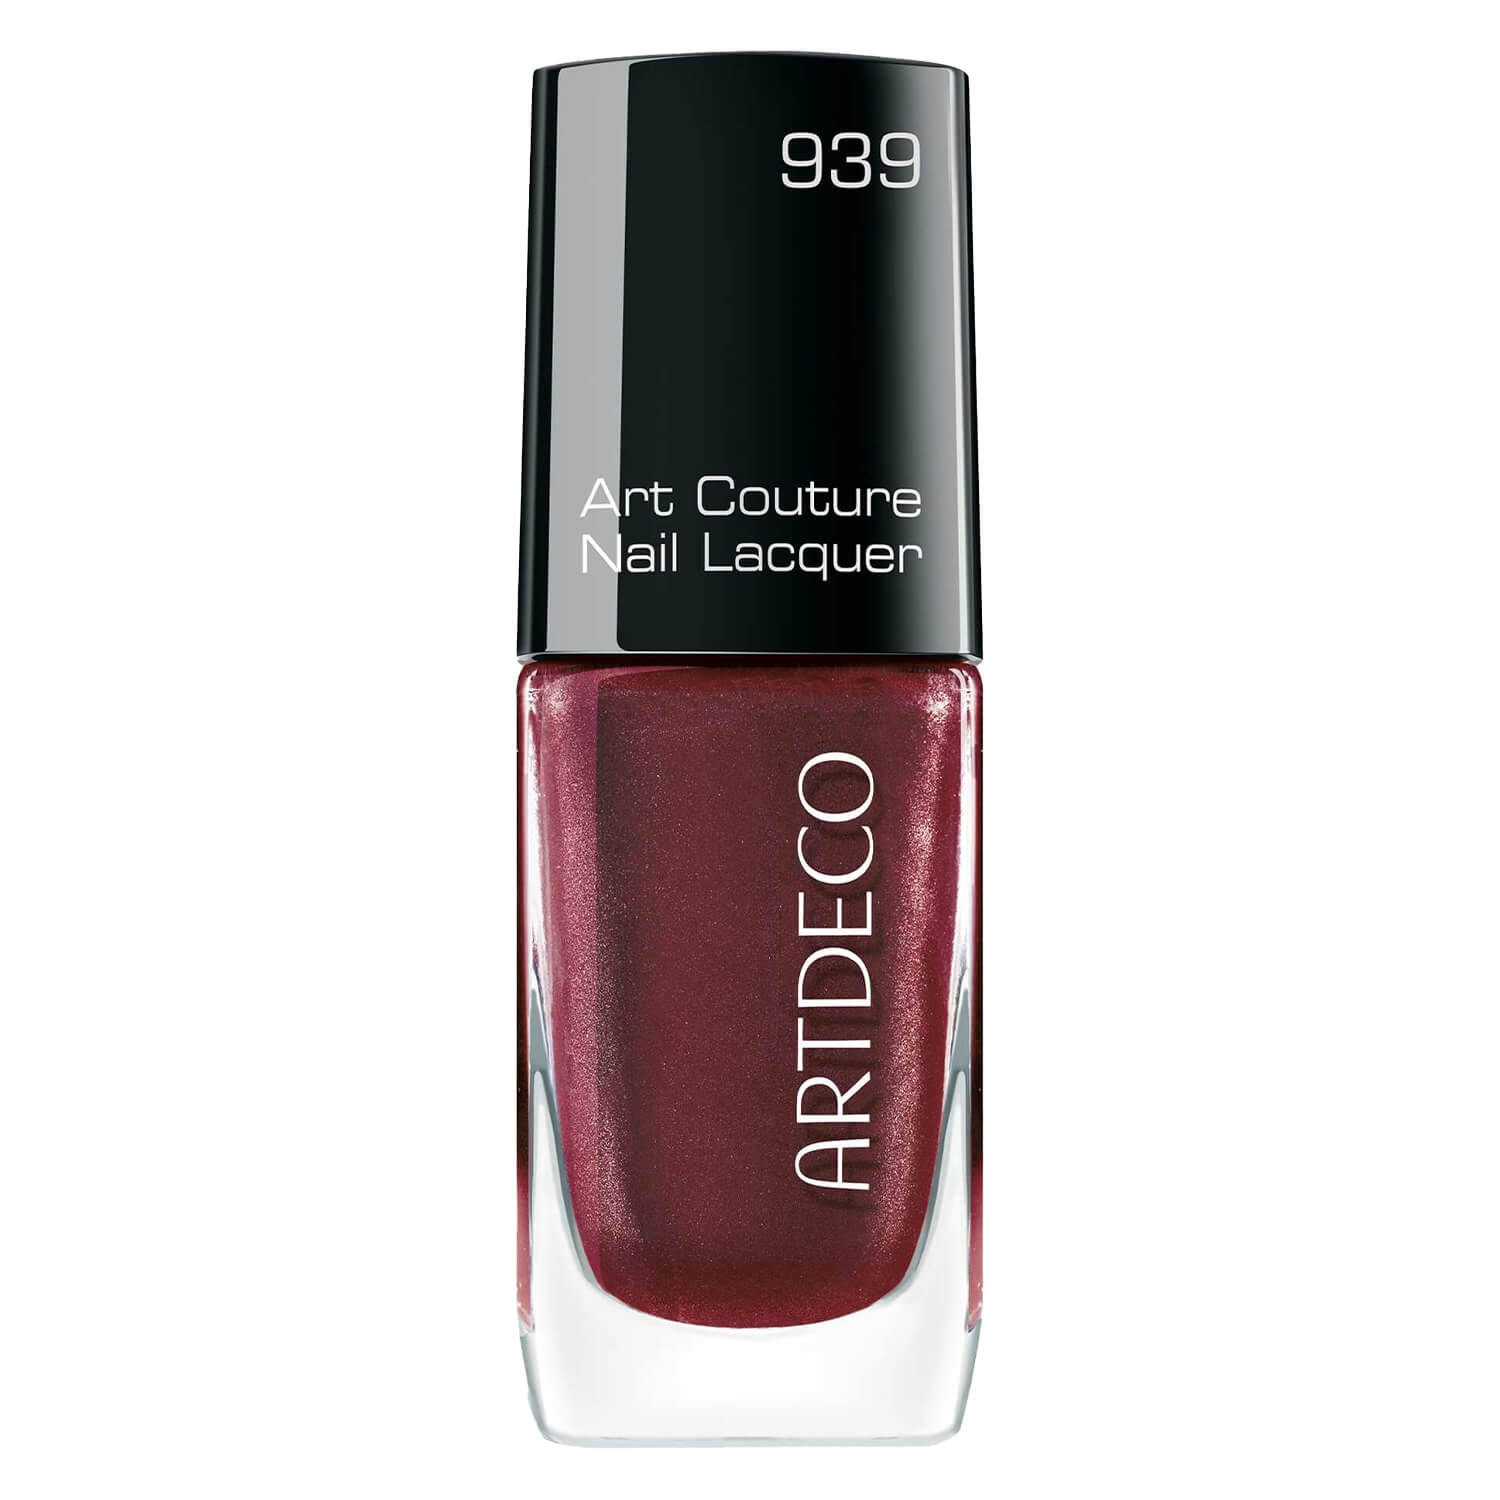 Product image from Art Couture - Nail Lacquer Burgundy Glamour 939